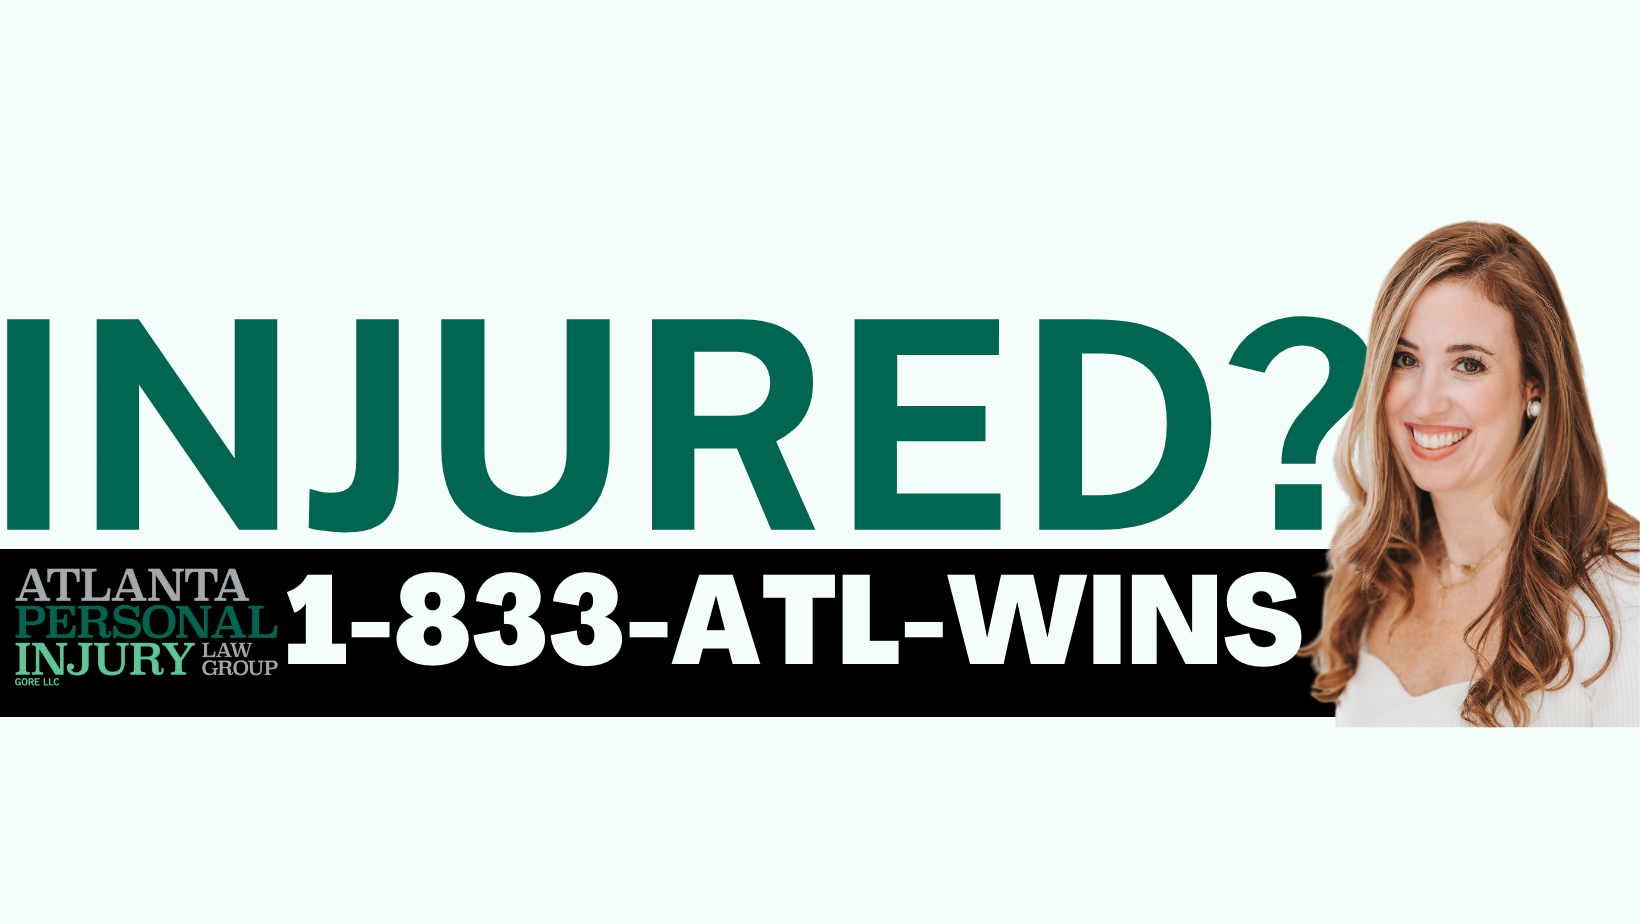 Injured? Call 1-833-ATL-WINS for legal assistance today! We take pride in our work and immediate responsibility for our actions, both personally and as a company. We act with integrity, doing the right thing for the client and the company, even when it’s not acknowledged by others or convenient.